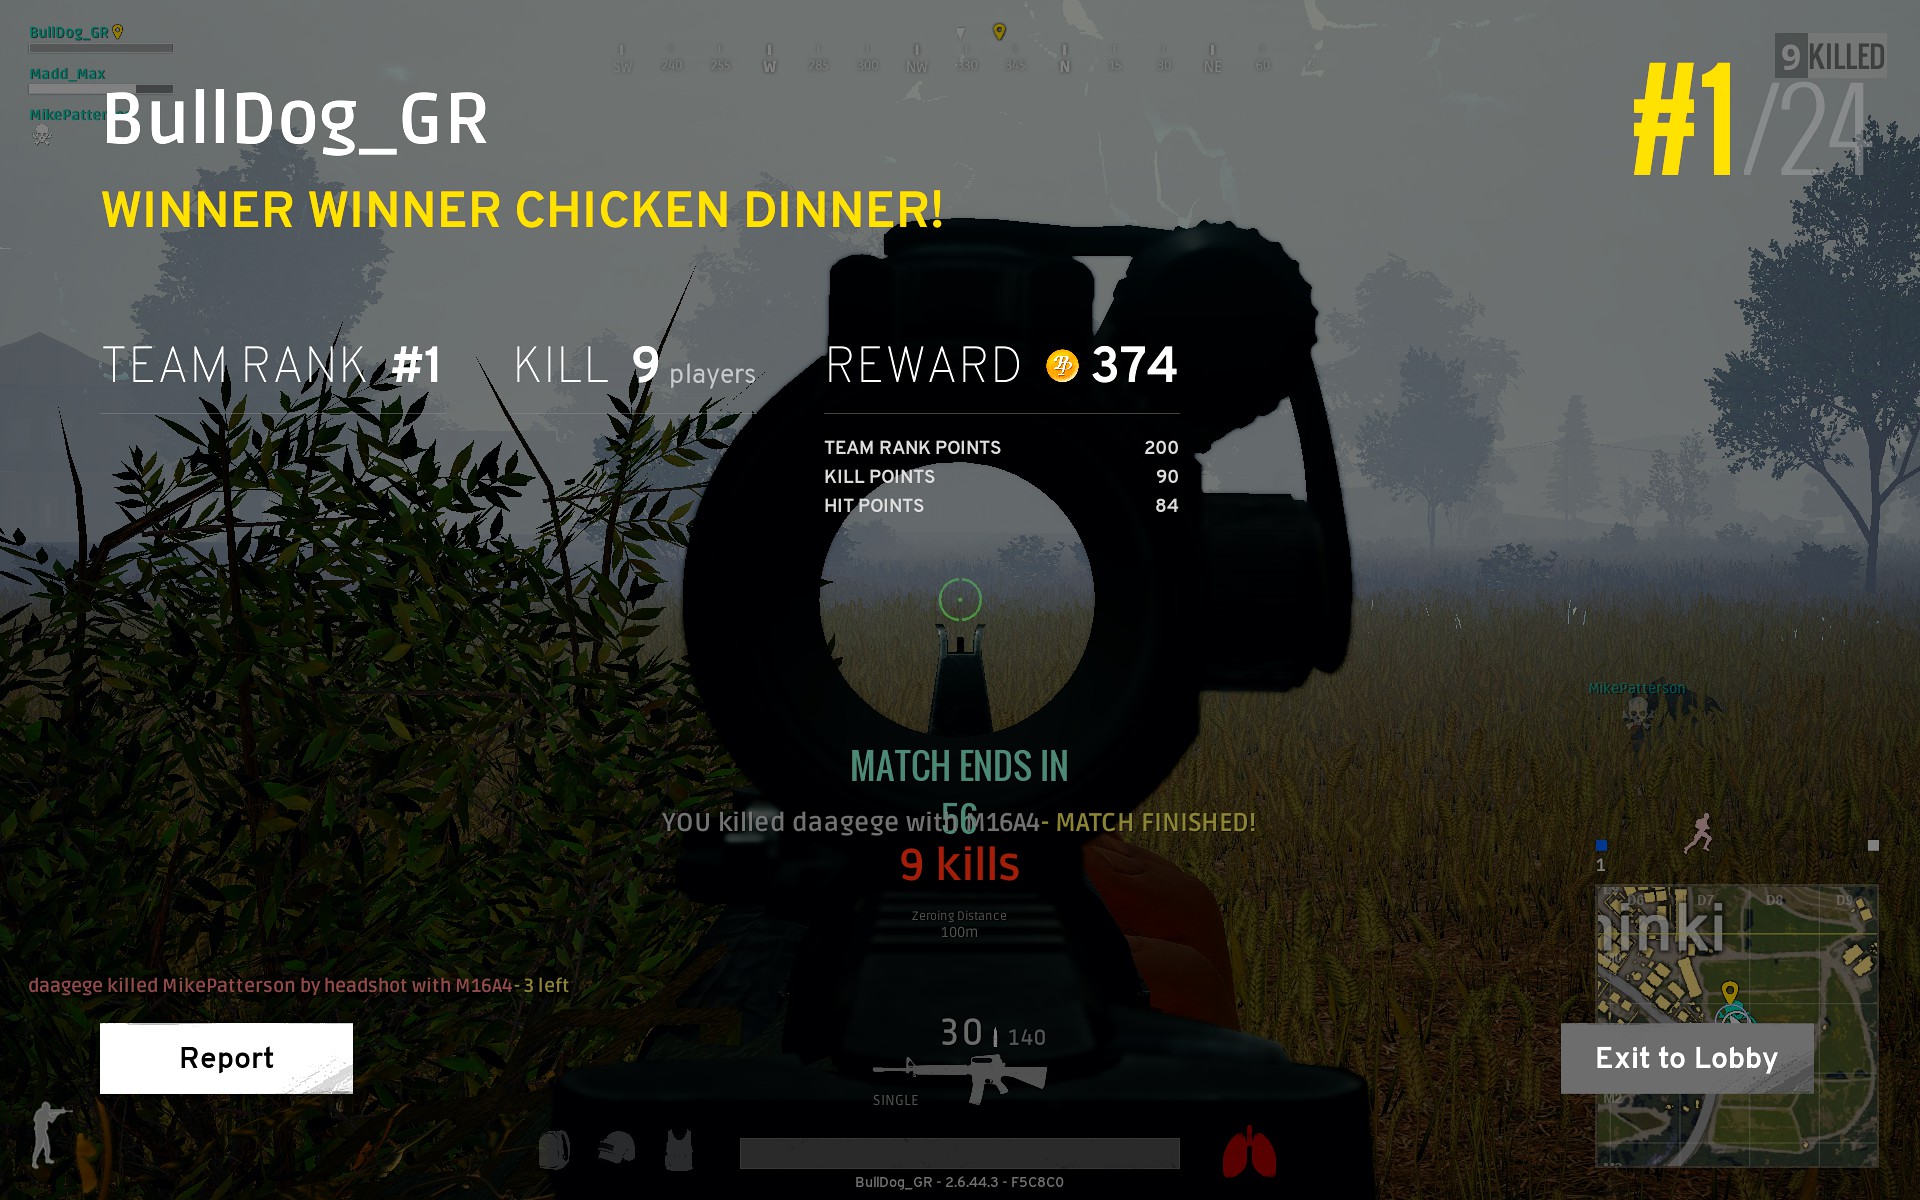 Lets see your Winner Winner Chicken Dinner screenshots! - Page 2 9DAB2D579310171EB1C75BFC602ABFCAD5B4497E